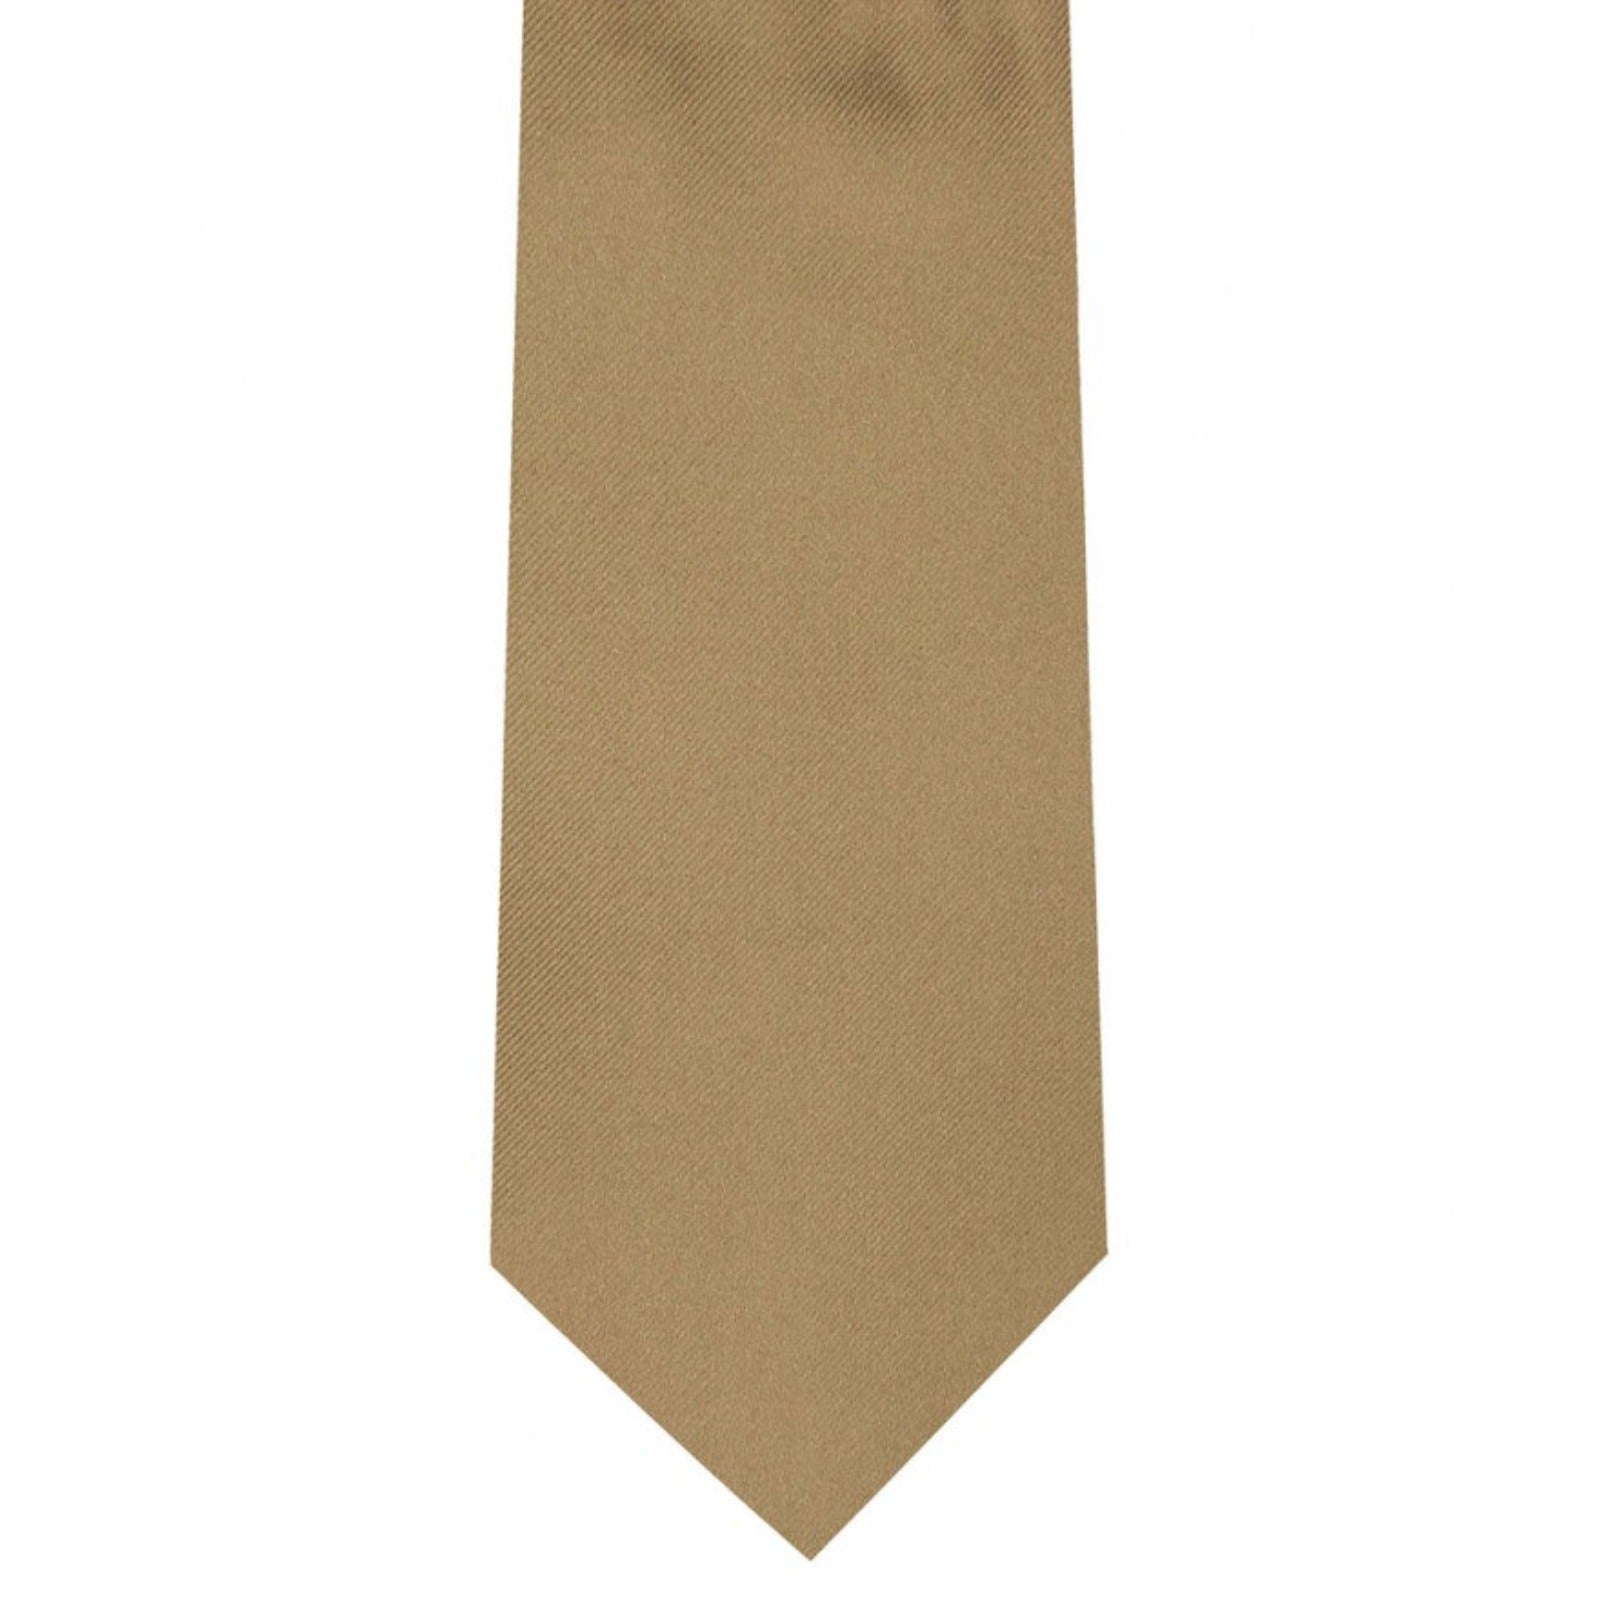 Classic Taupe Tie Ultra Skinny tie width 2.25 inches With Matching Pocket Square | KCT Menswear